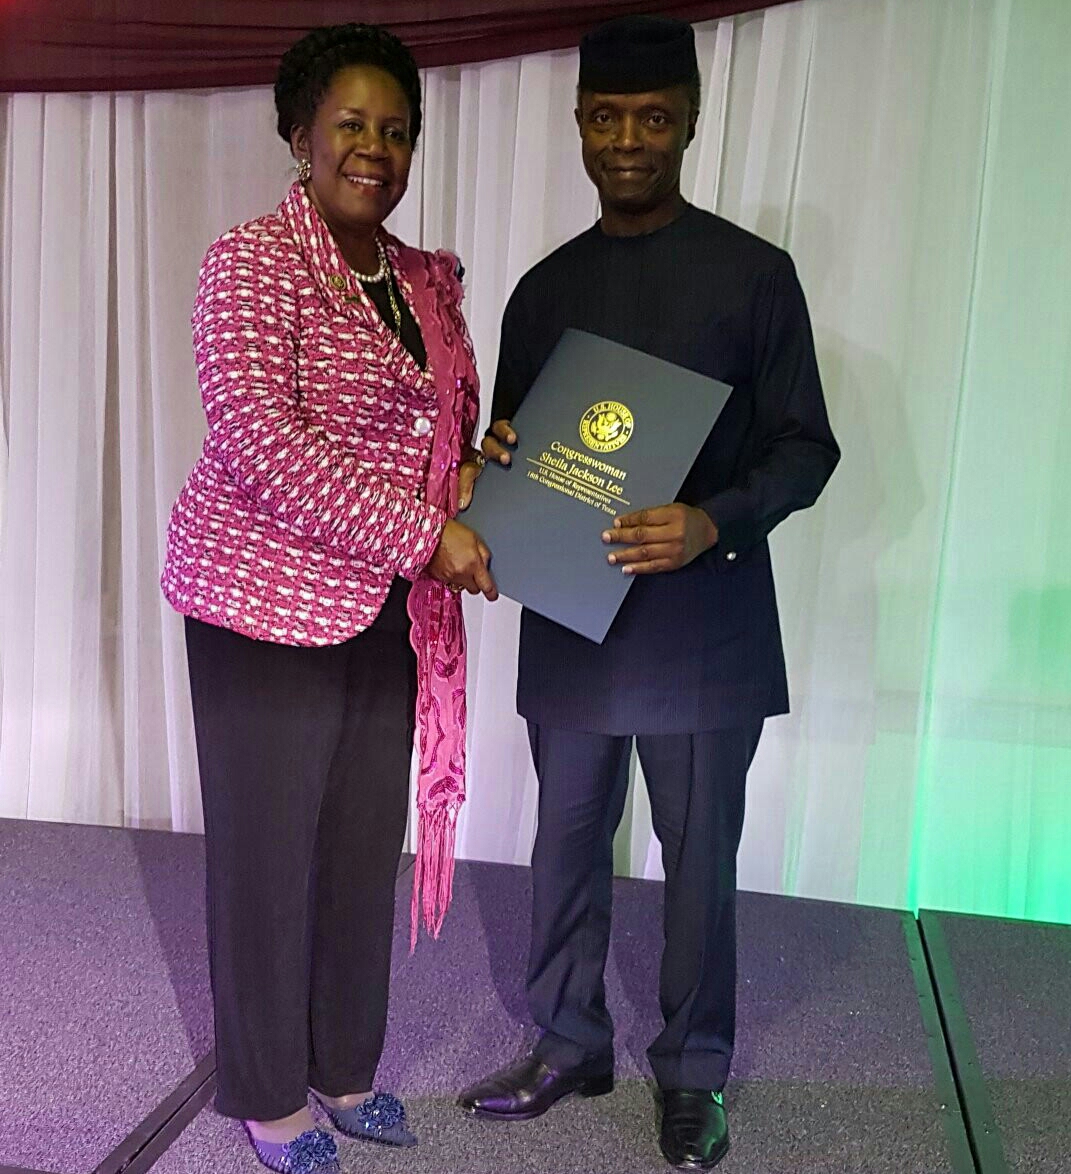 VP Osinbajo Receiving a US Congressional Proclamation in His Honor From Congresswoman Sheila Jackson-Lee, Representing Texas State at the US House of Reps On 30/10/2016